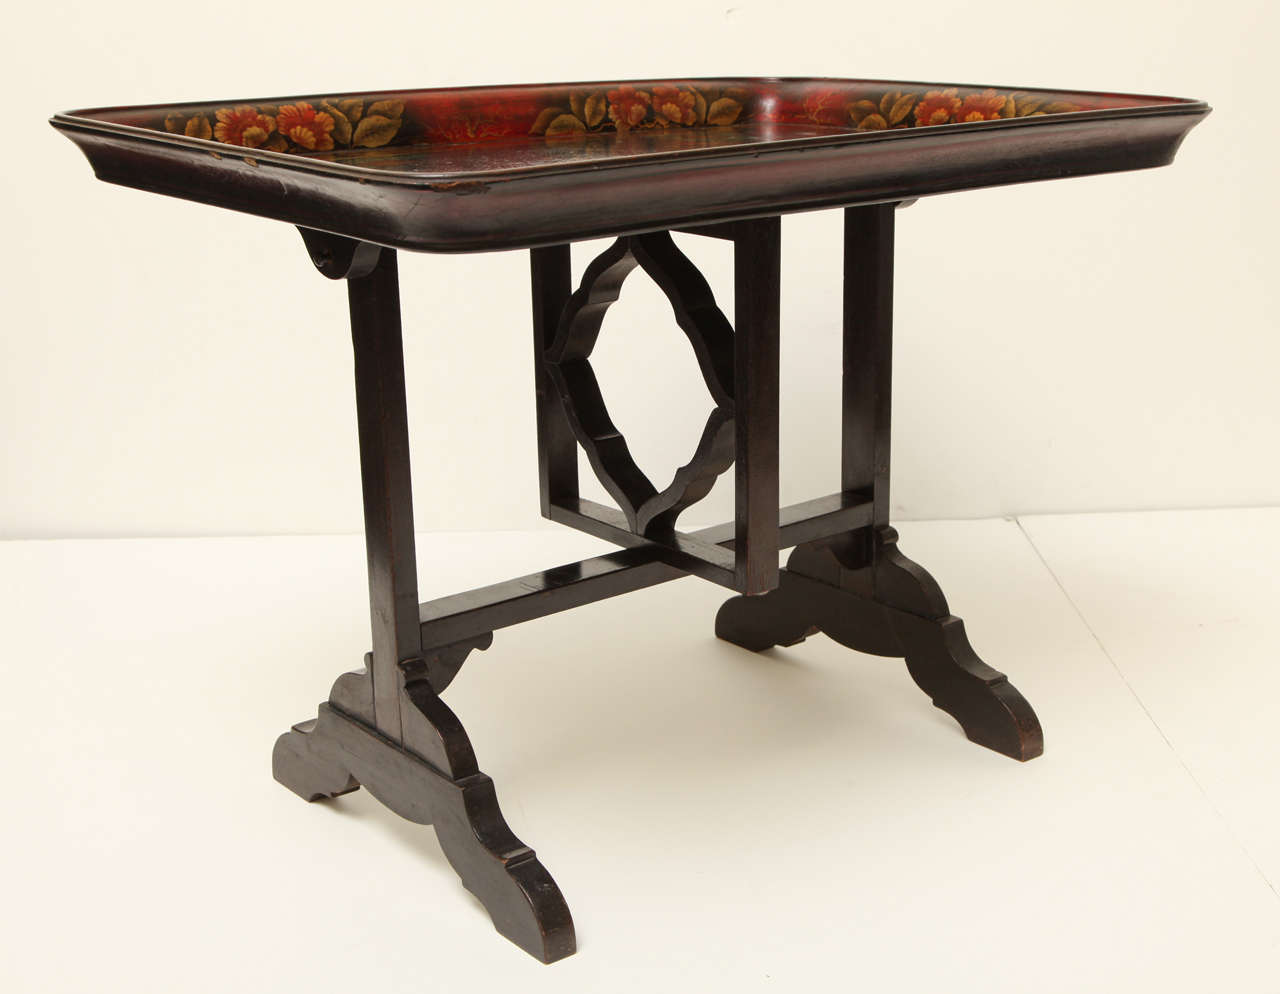 Polychrome Wood Tilt Top Coffee Table With Chinoiserie Decoration.  The Base Is Fabricated With A Decorated Turn Support For Tilting.